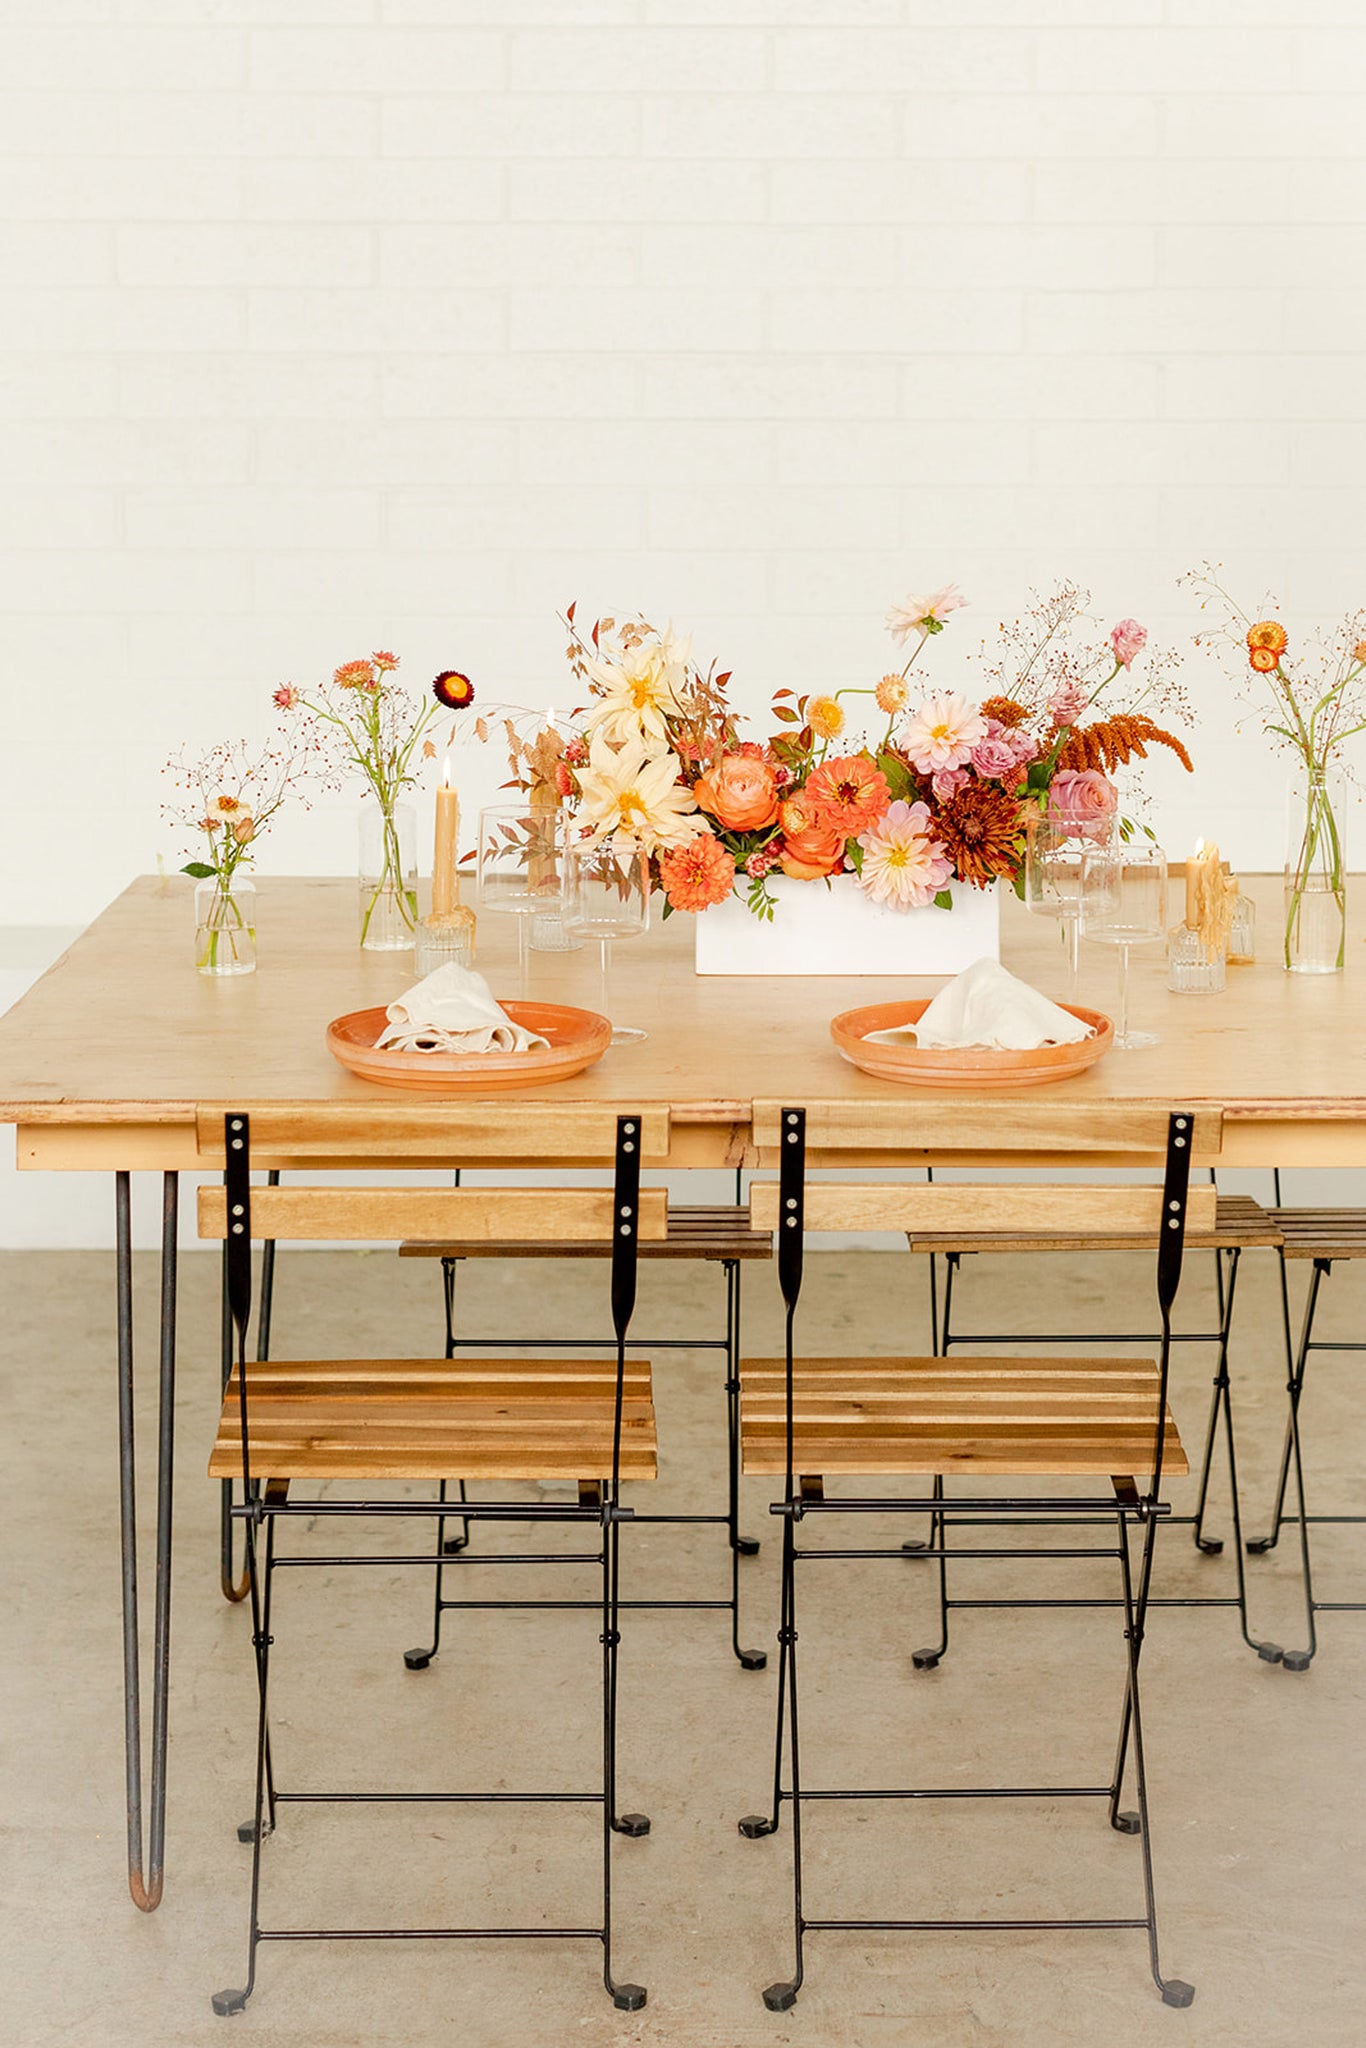 Thanksgiving table with flowers and plates and chairs